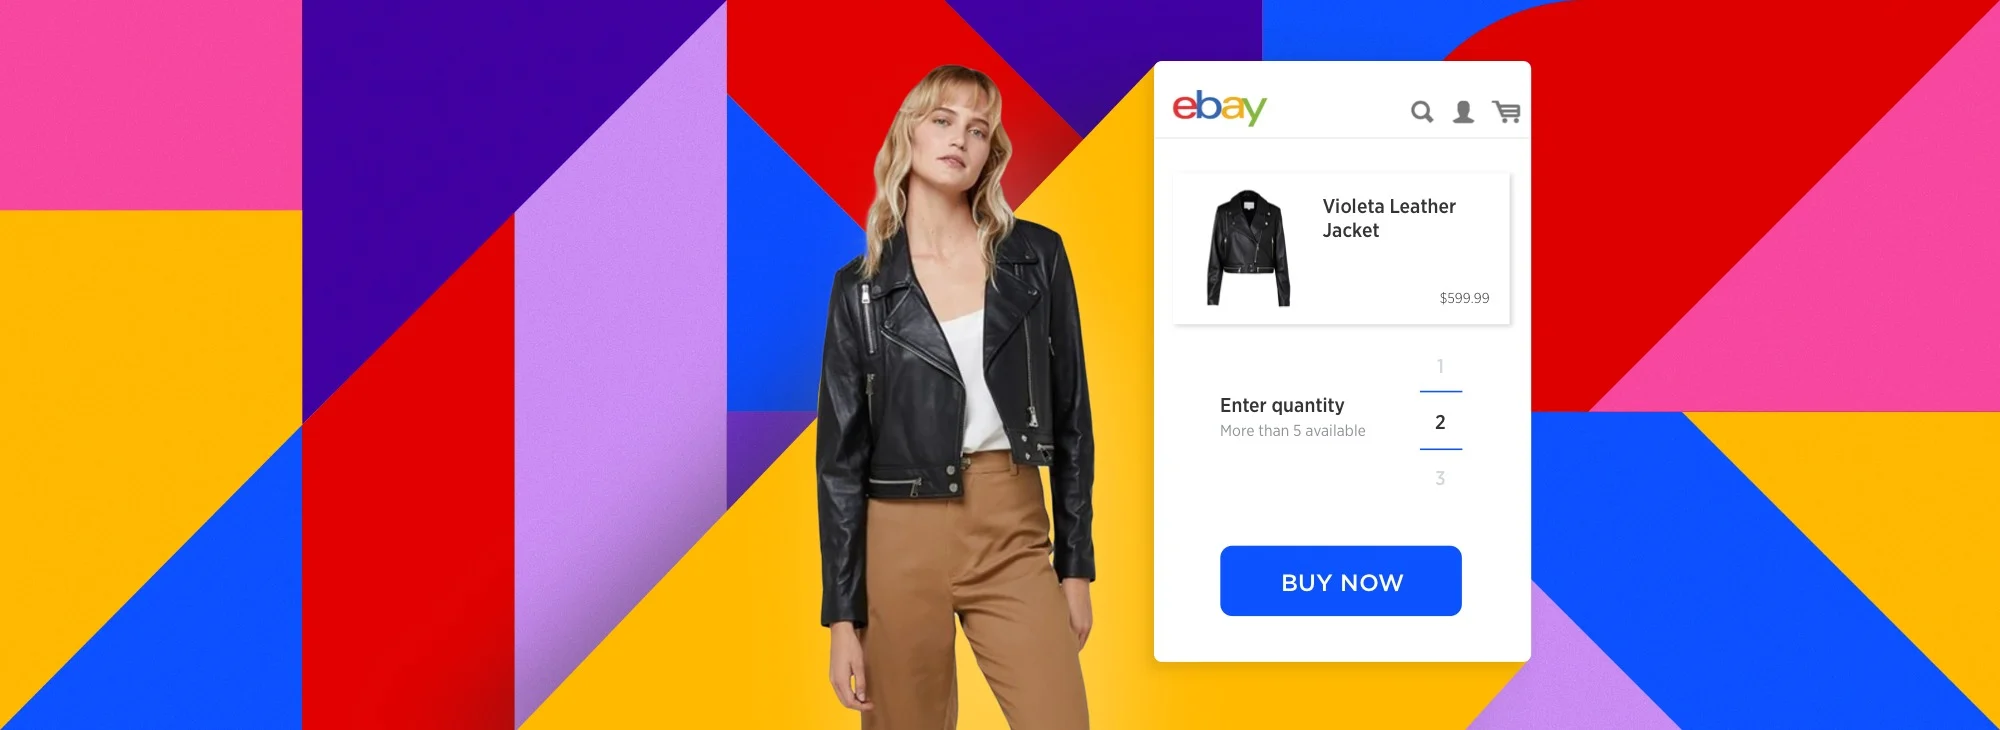 https://cms-wp.bigcommerce.com/wp-content/uploads/2019/10/2019-August-Content-Blog-Headers-Batch-1-Guide-for-How-To-Sell-On-eBay-4858-MT-Copy@1x-1.jpg